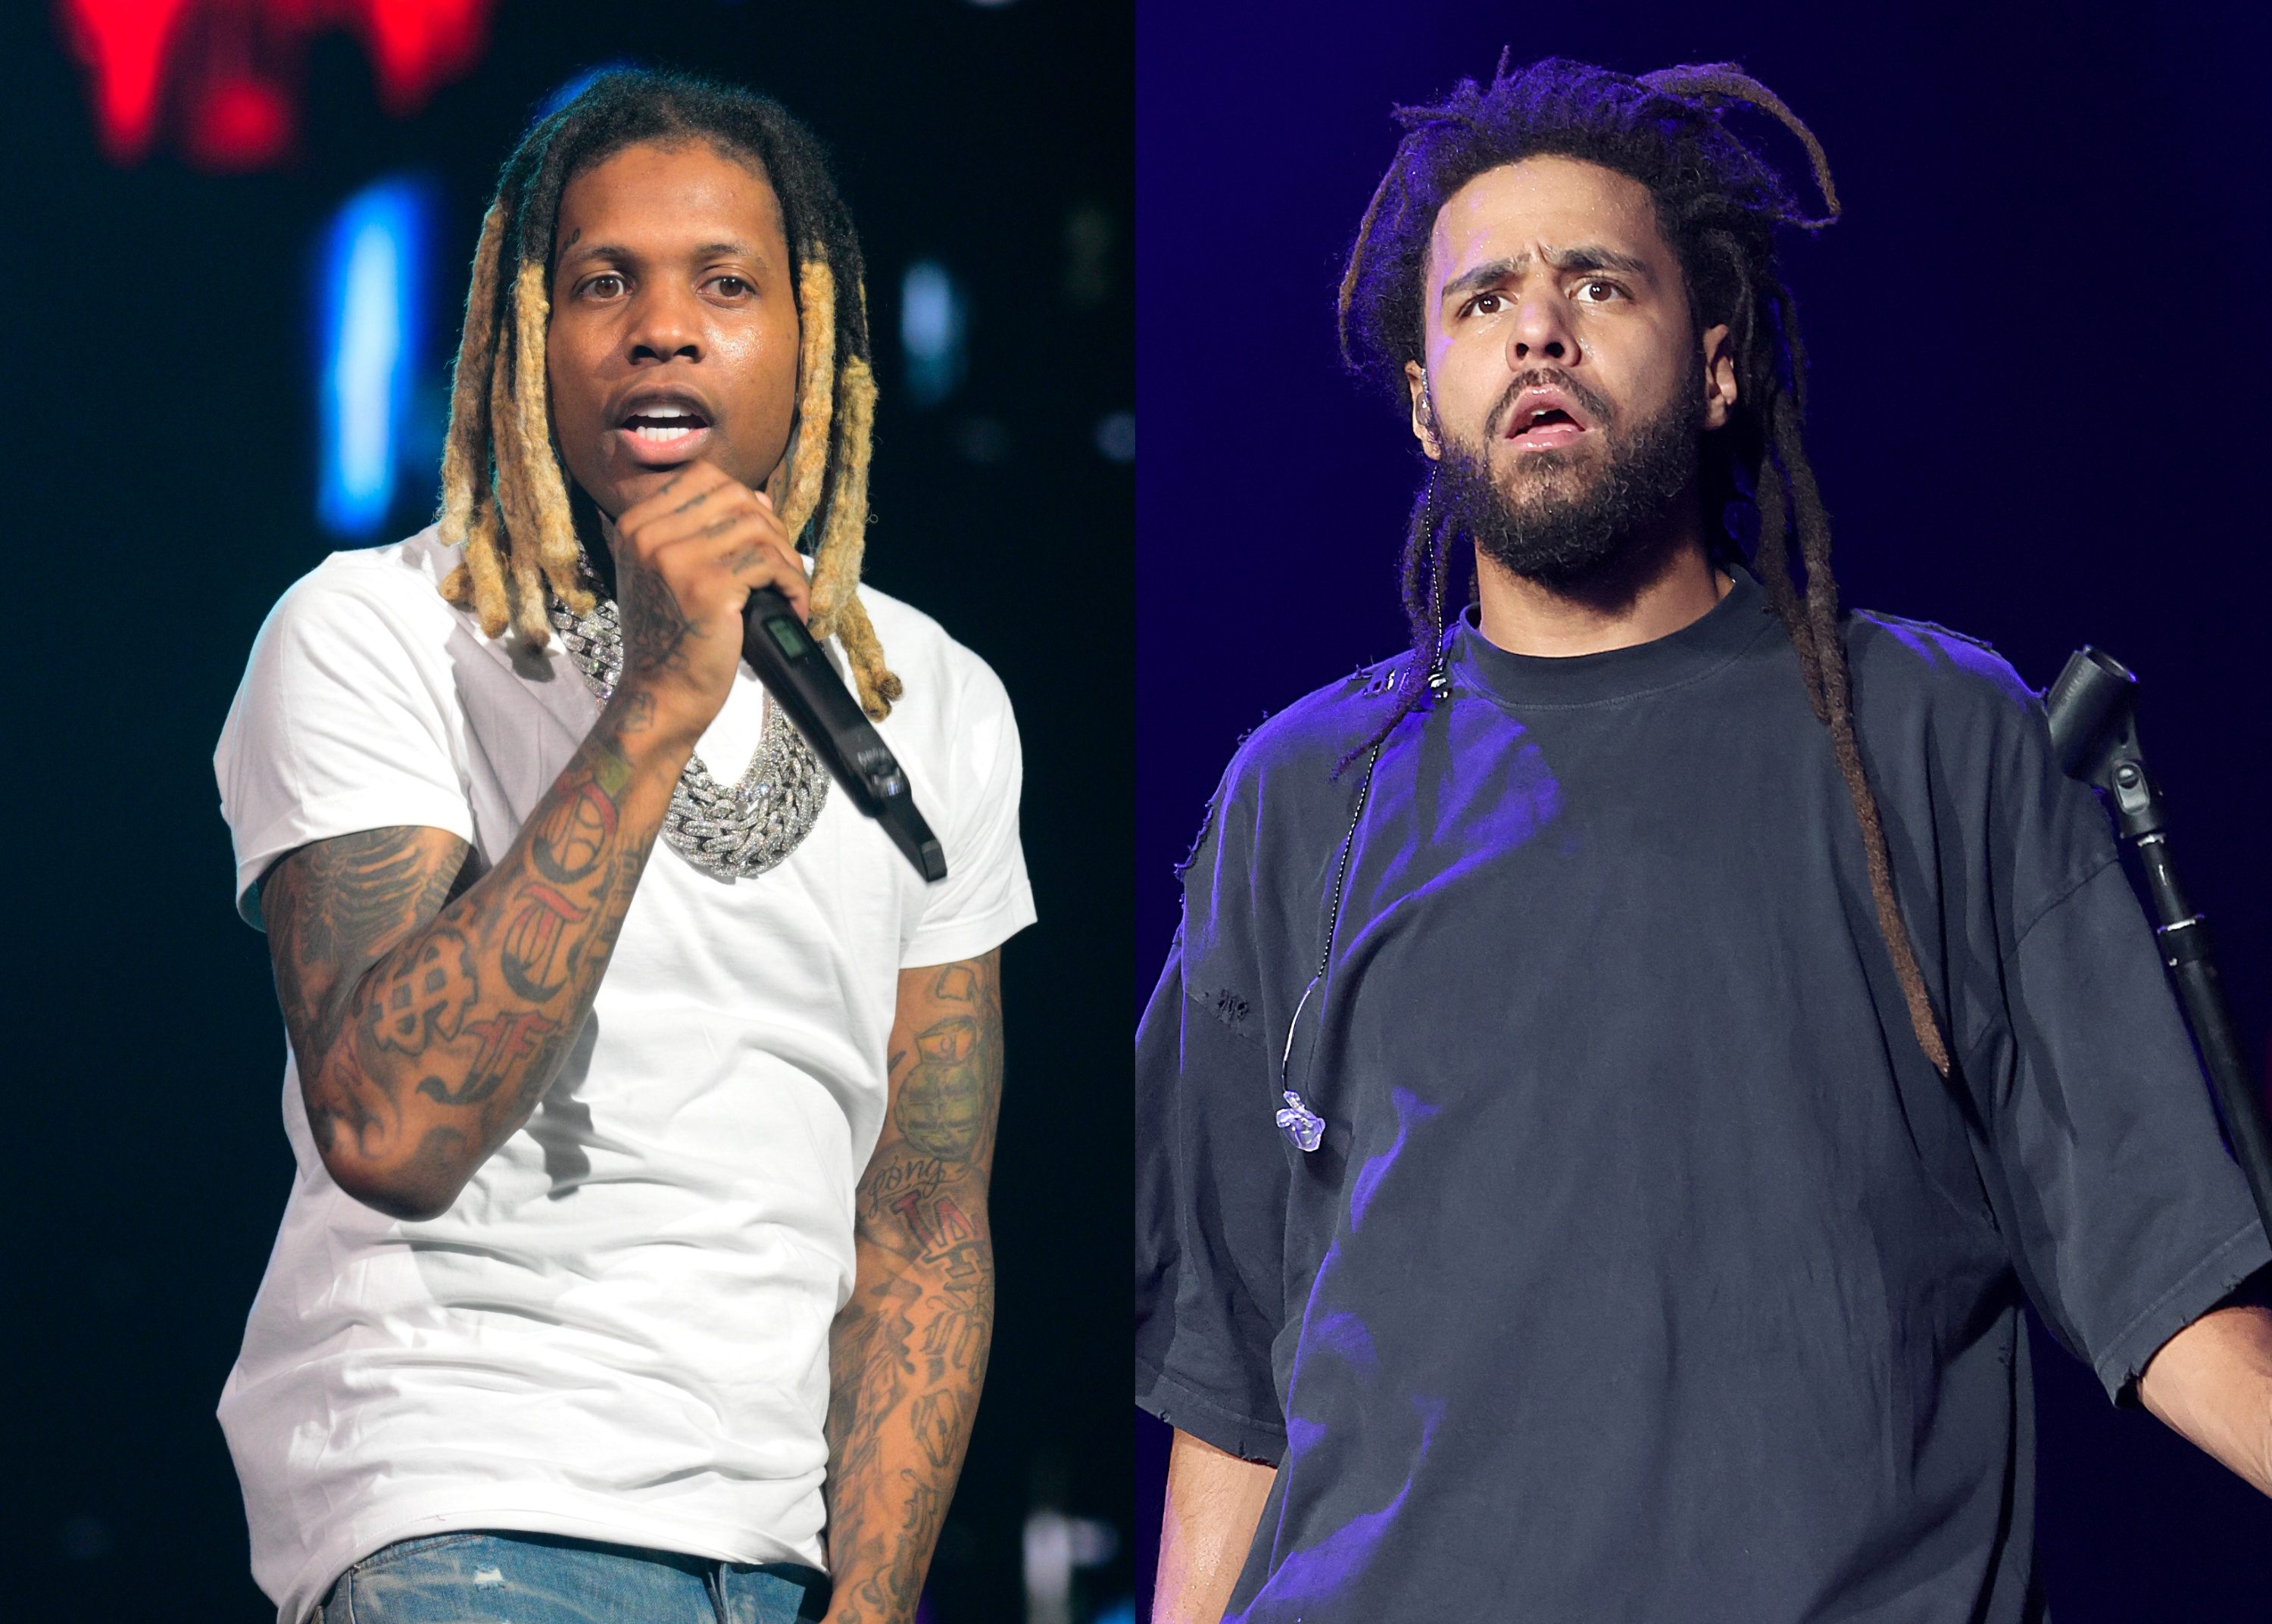 Lil Durk & J. Cole’s First Collab, “All My Life” Is A “Fire Emoji” Playlist Stand Out: Stream